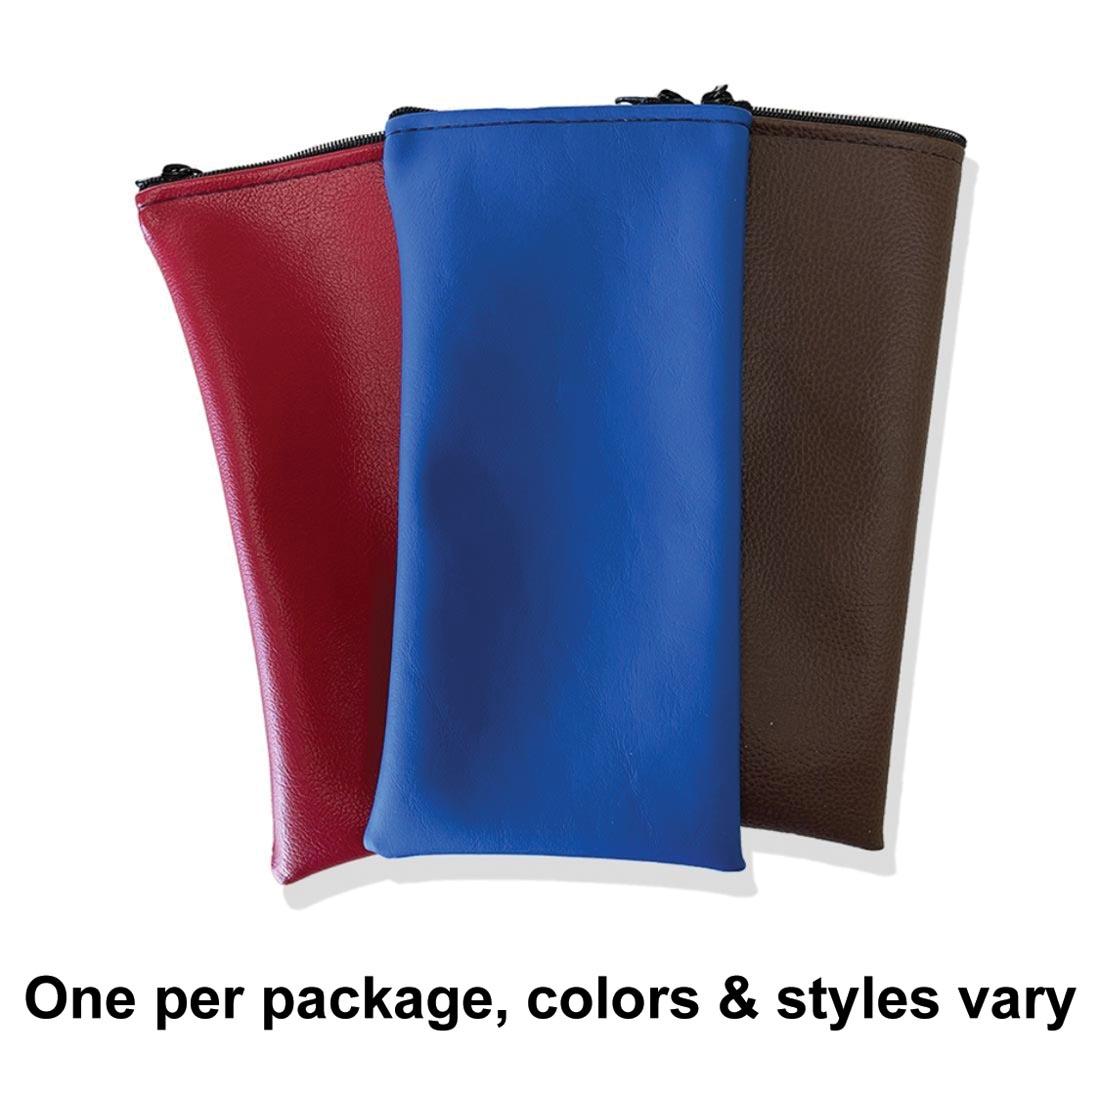 3 pencil zipper storage bags, with the words "One per package, colors & styles vary"